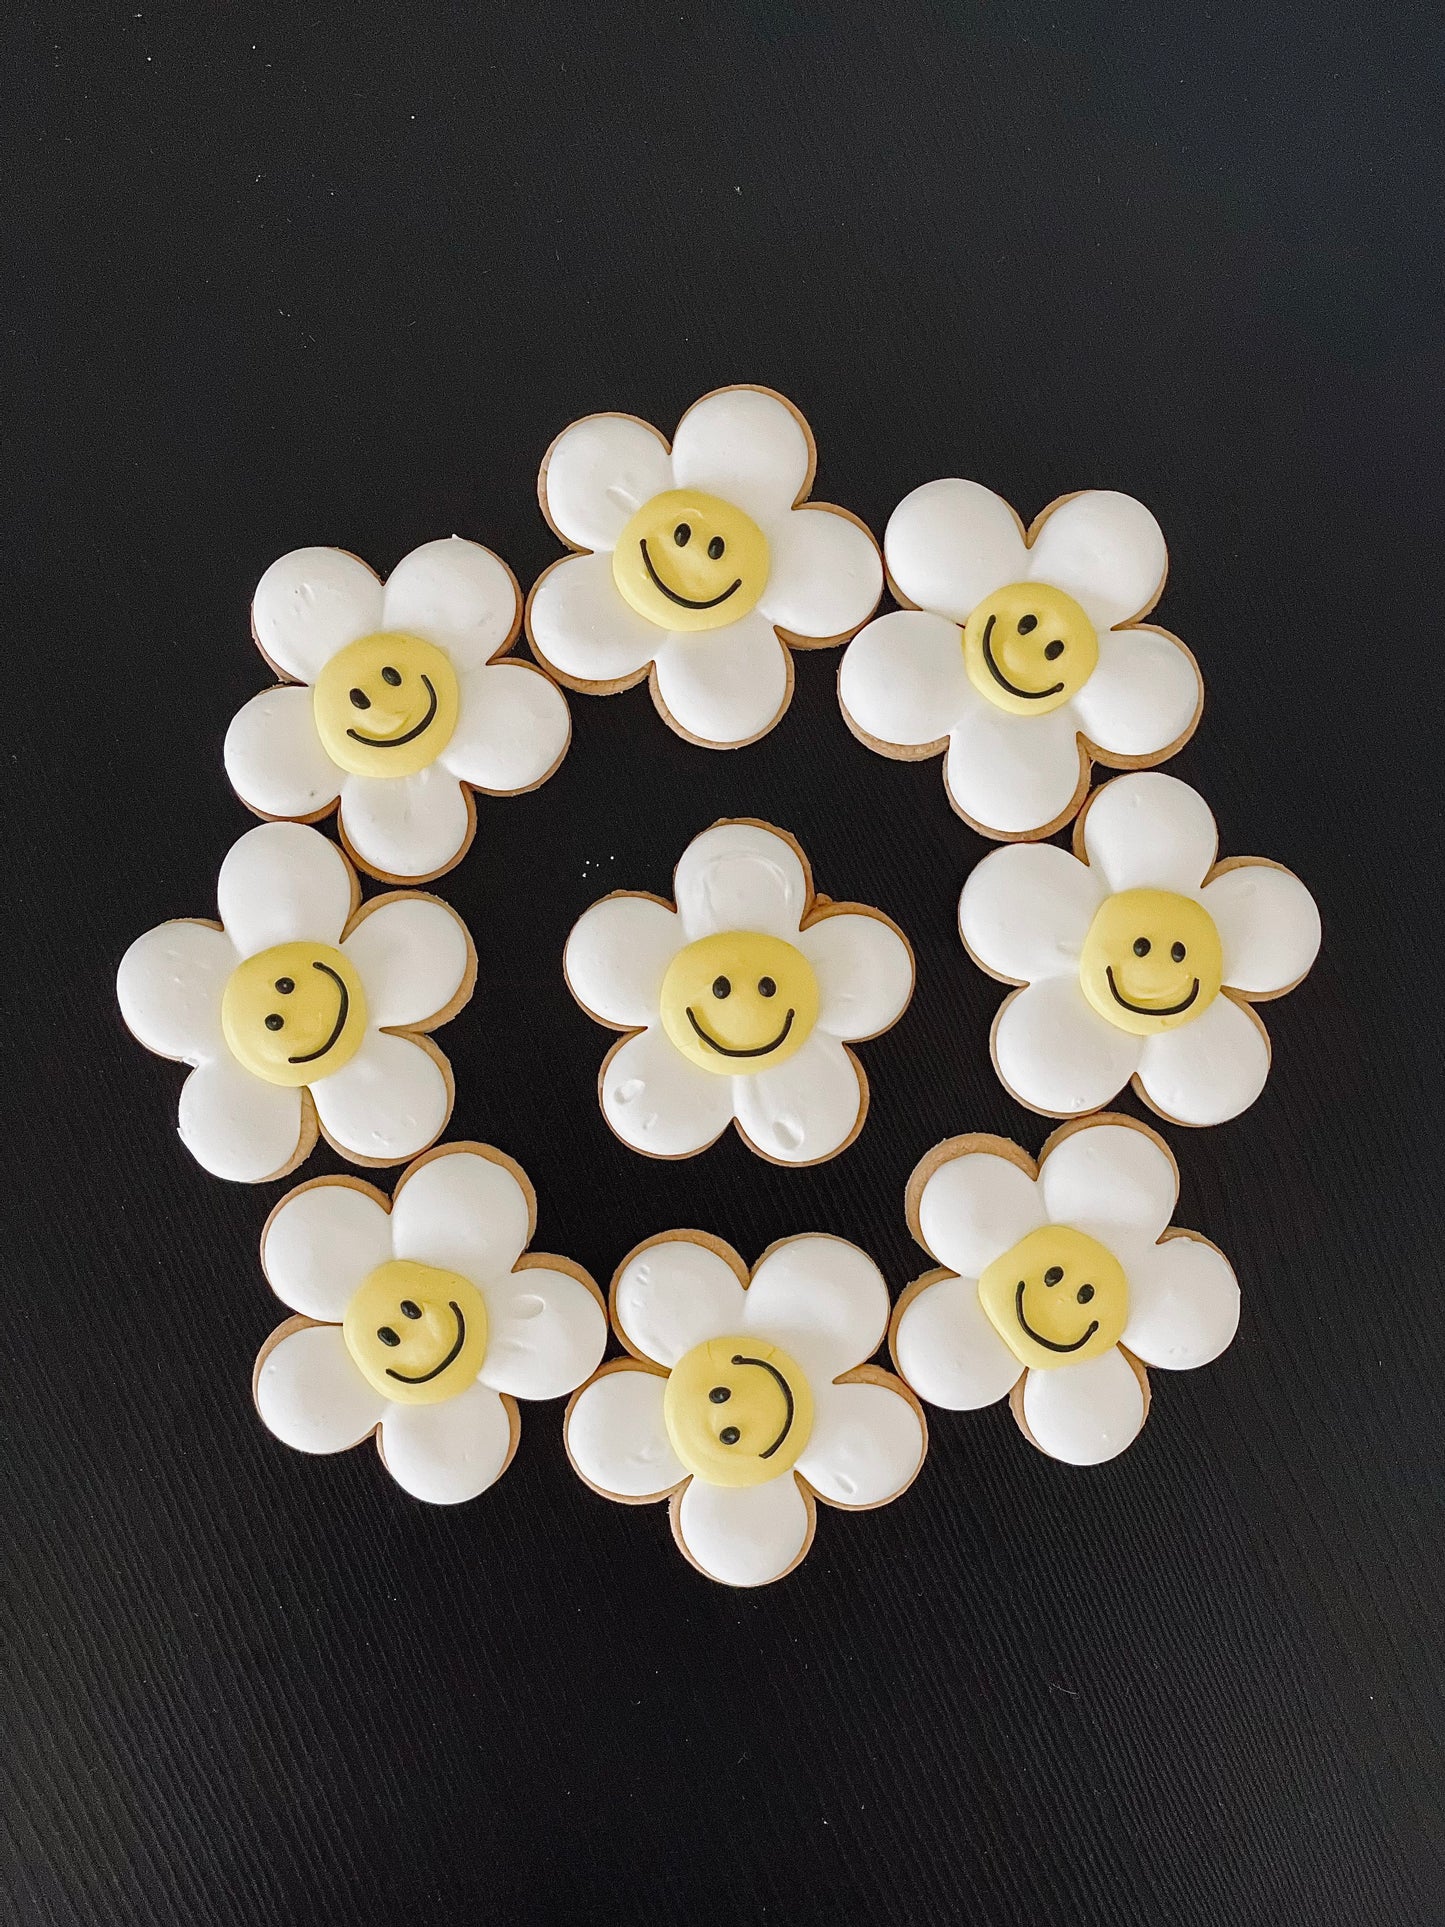 Smiley Face Cookies